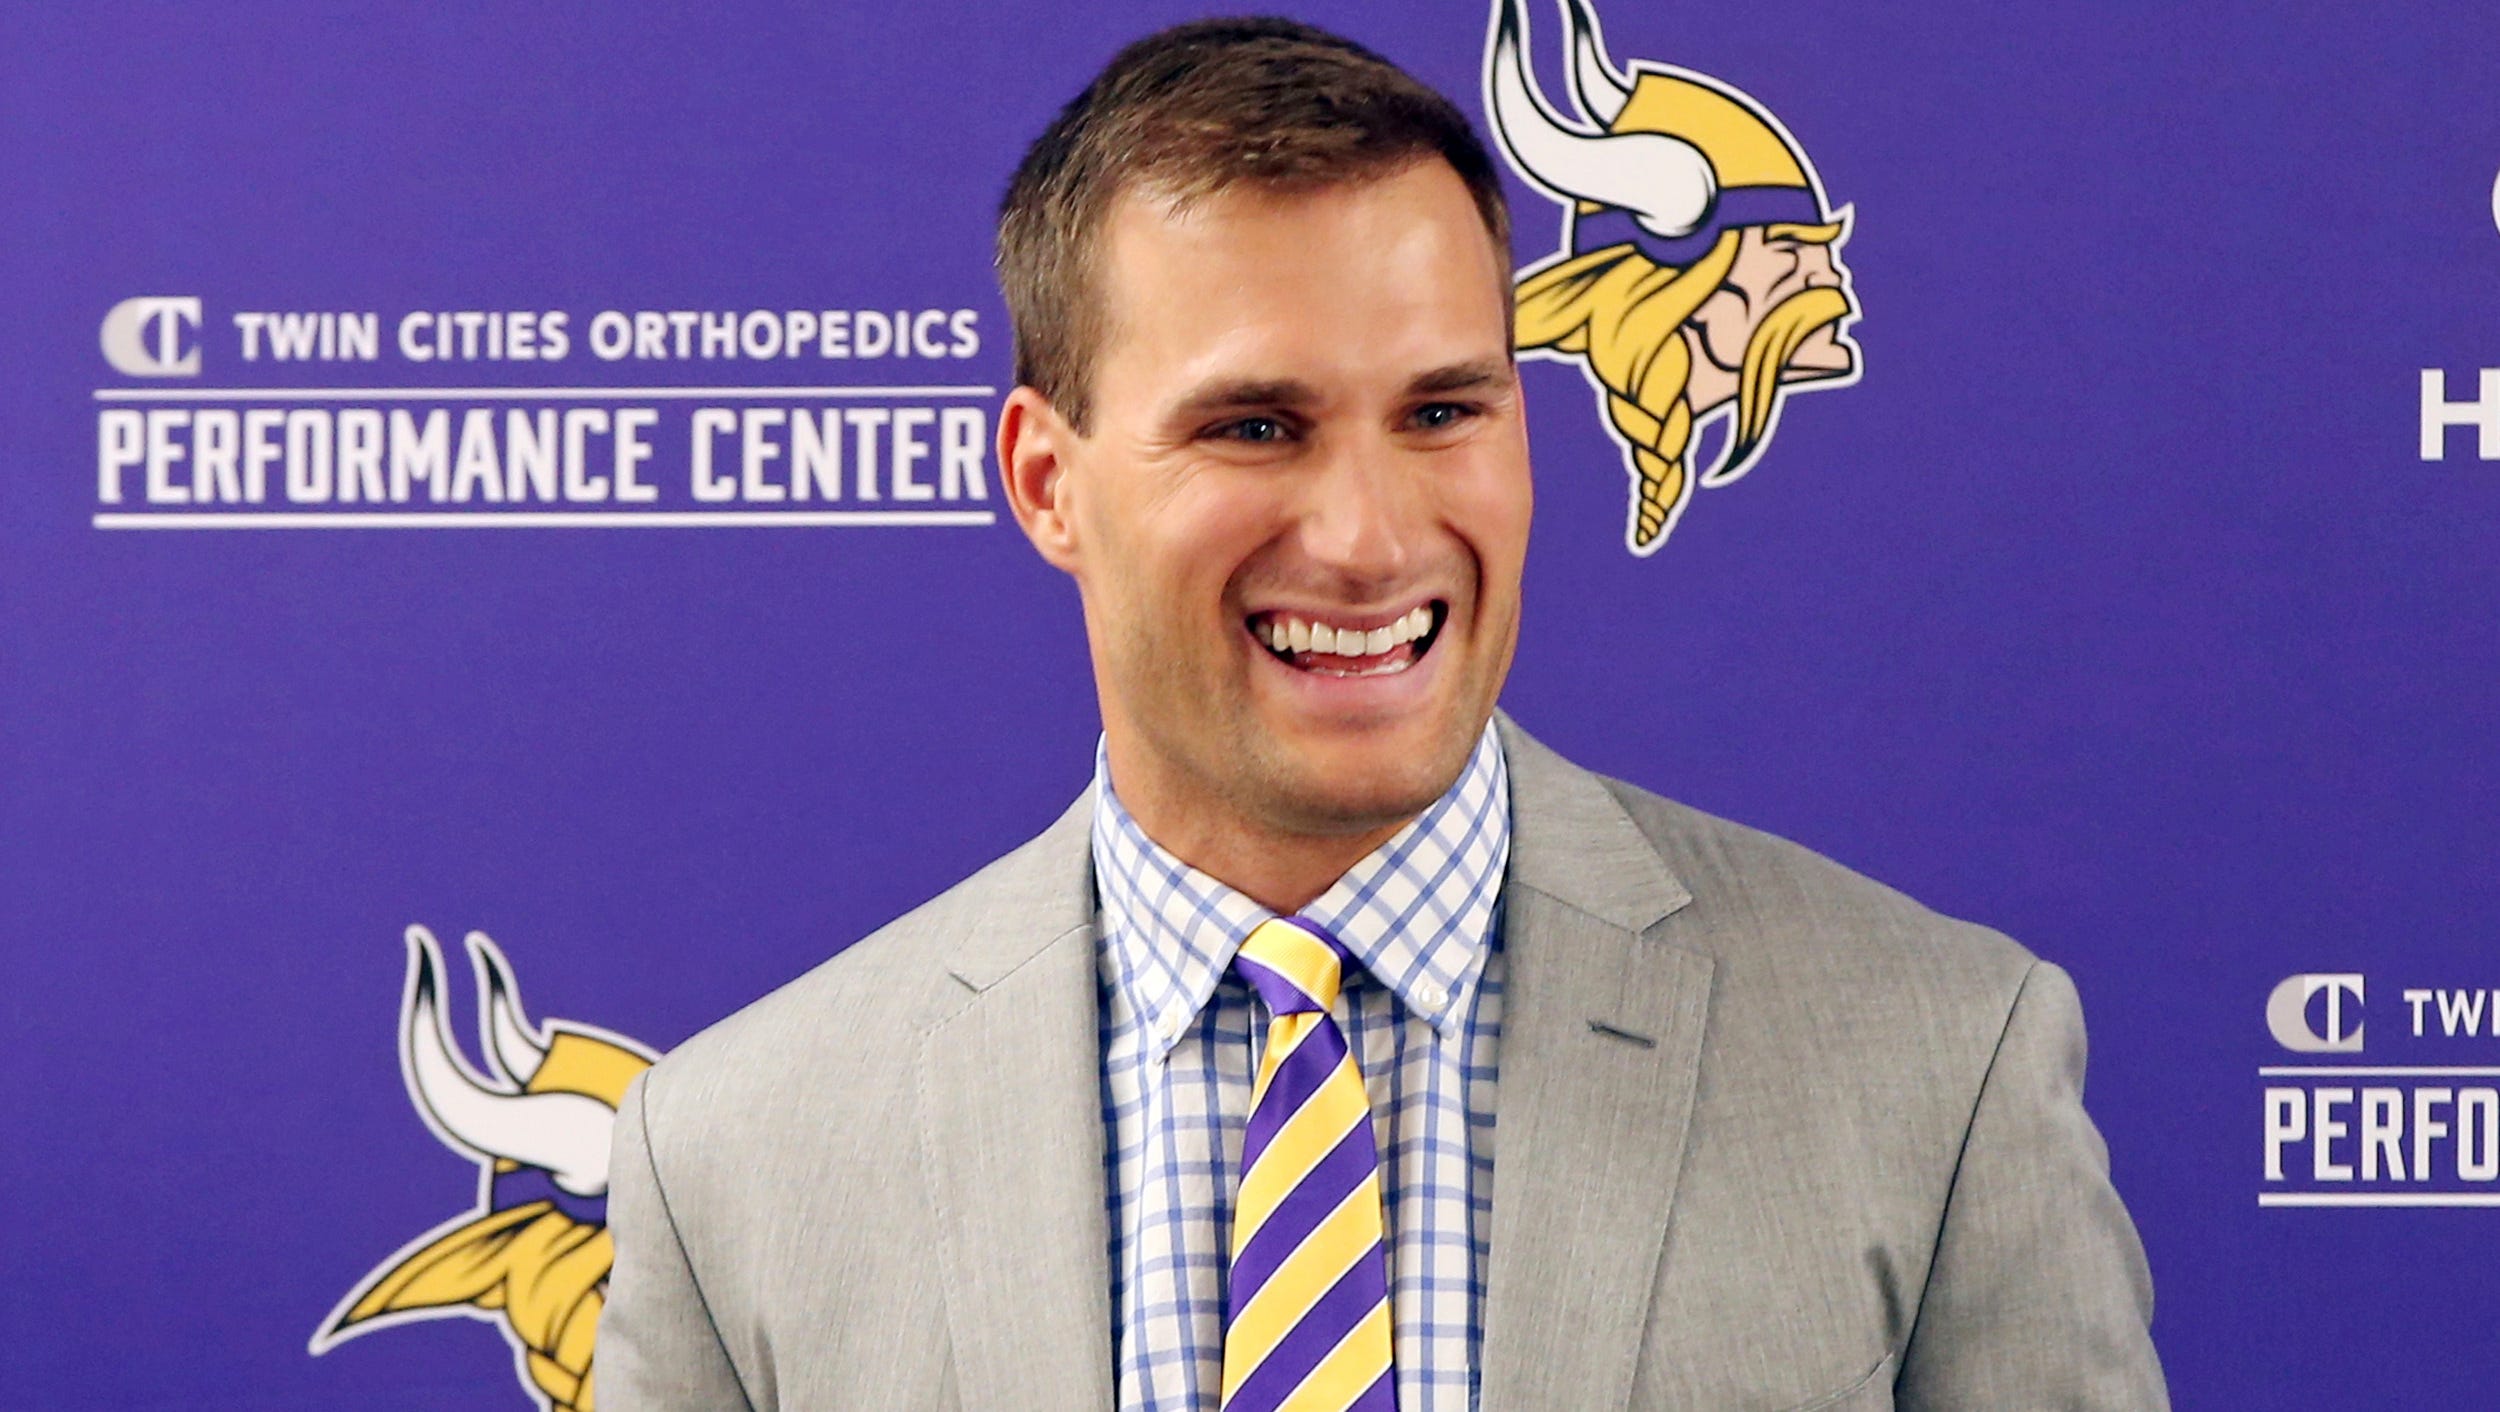 Minnesota Vikings new quarterback Kirk Cousins addresses the media after he was introduced during a news conference, after signing a three-year, $84 million contract March 15, 2018.